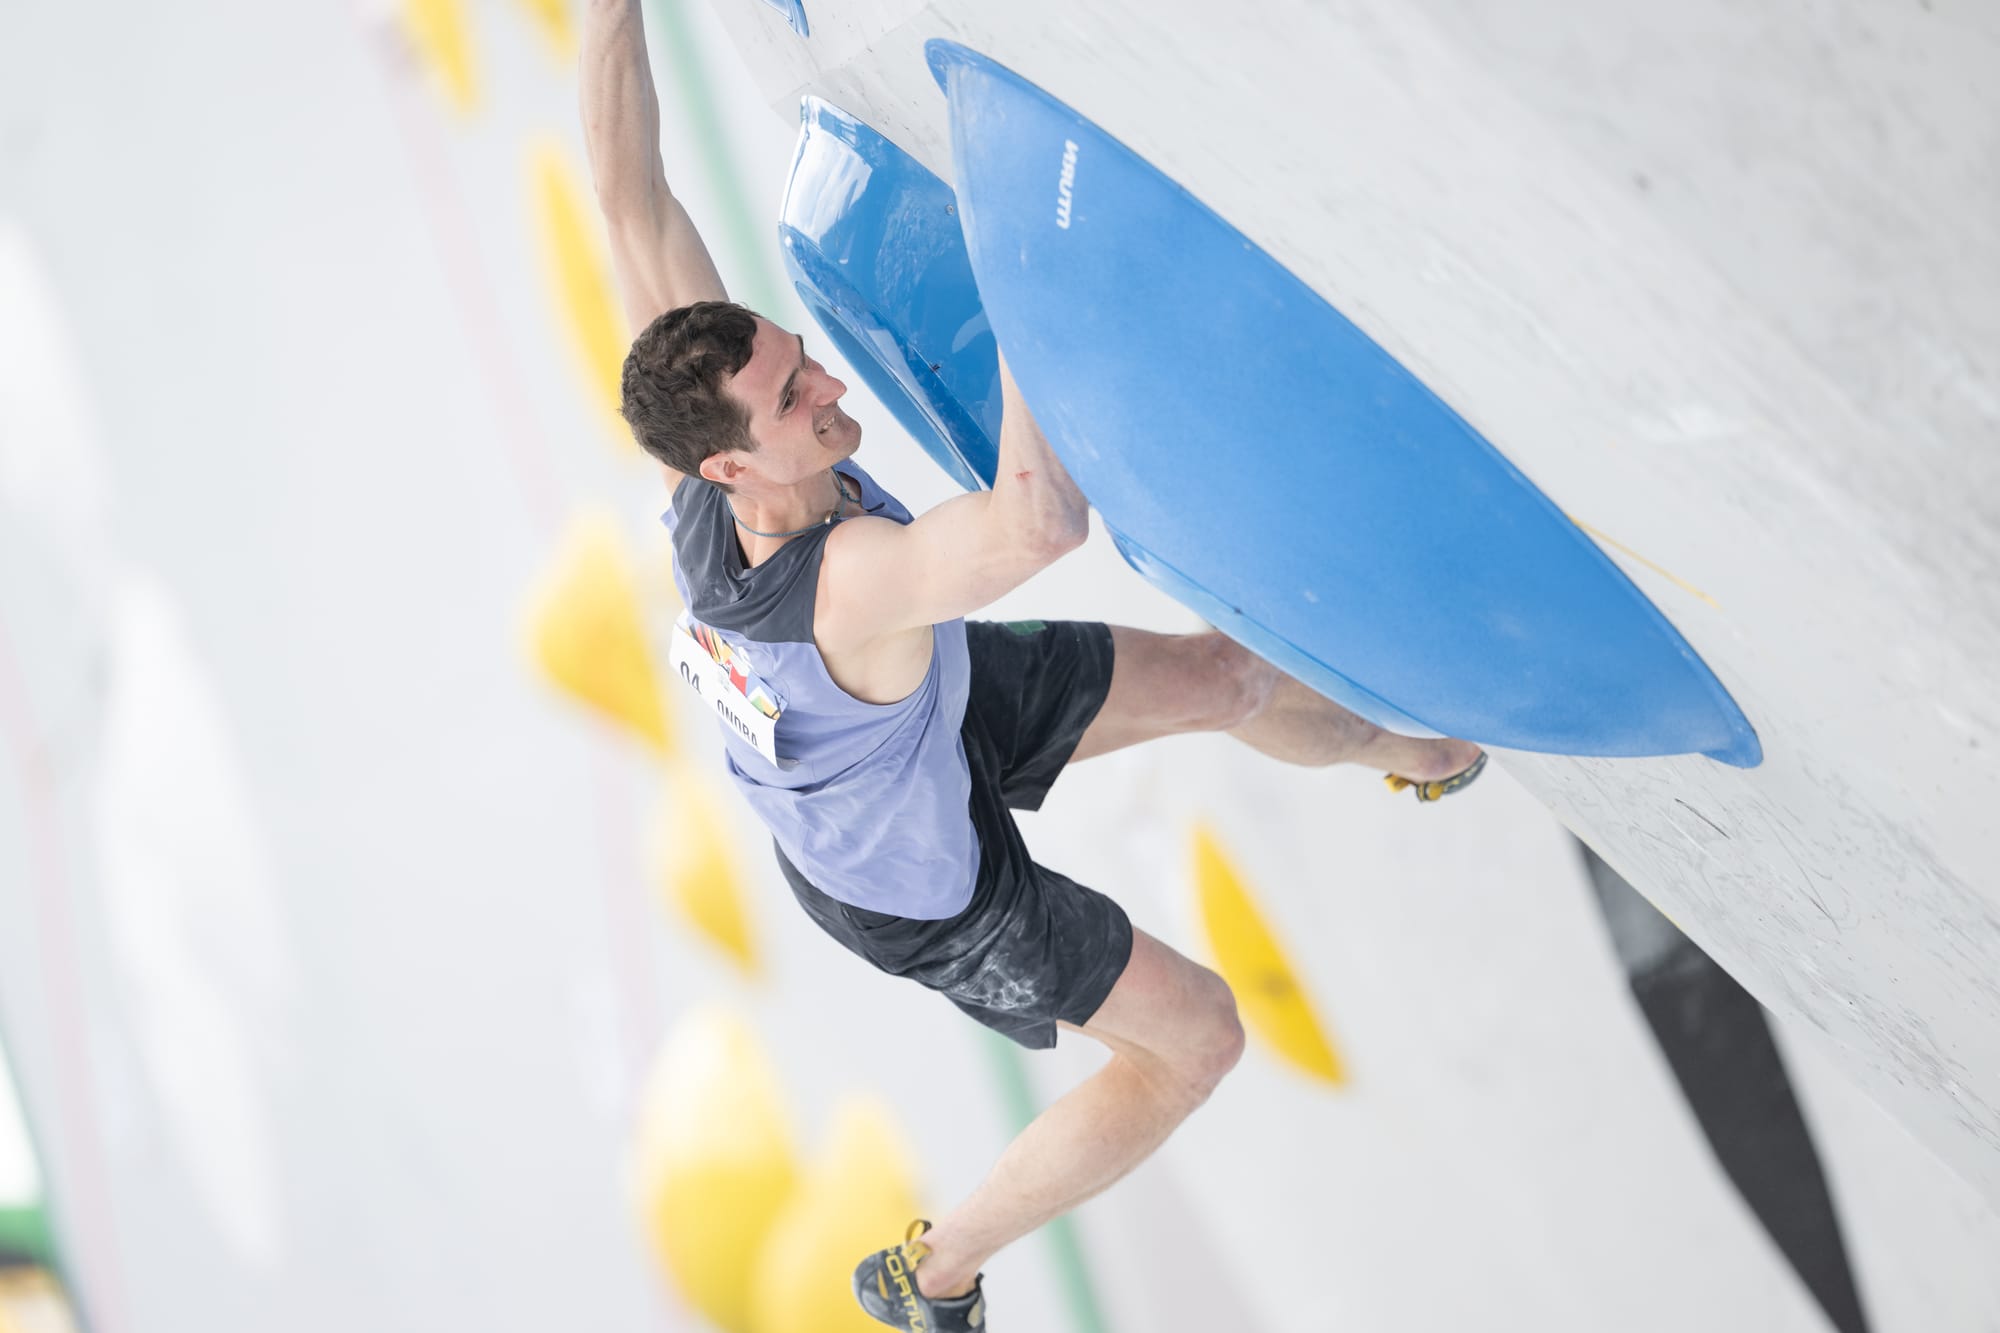 Ondra fighting in the Male boulder round.